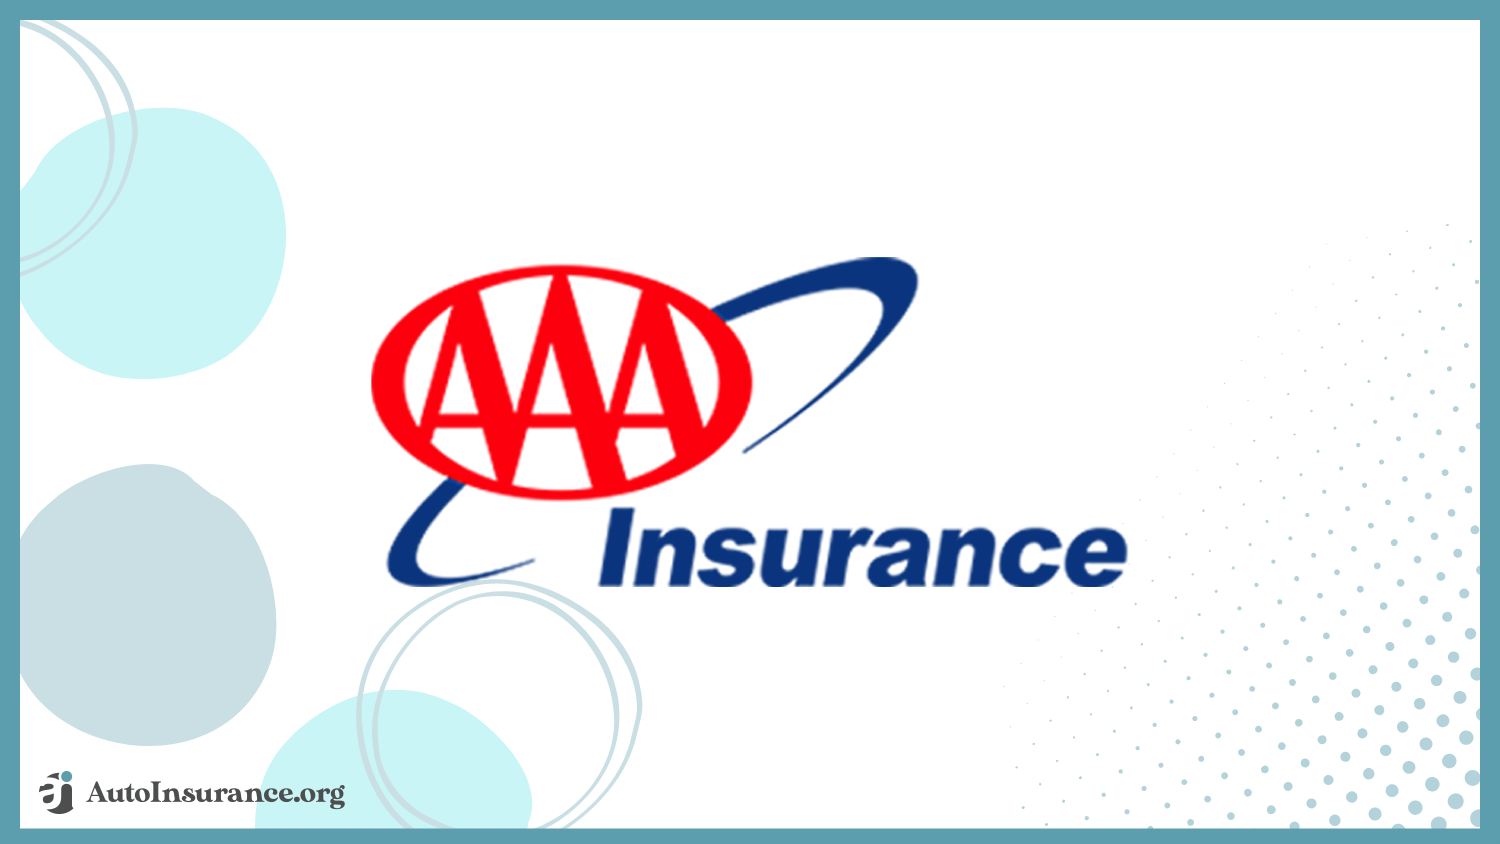 AAA: Best Auto Insurance for Drivers with a Canadian License